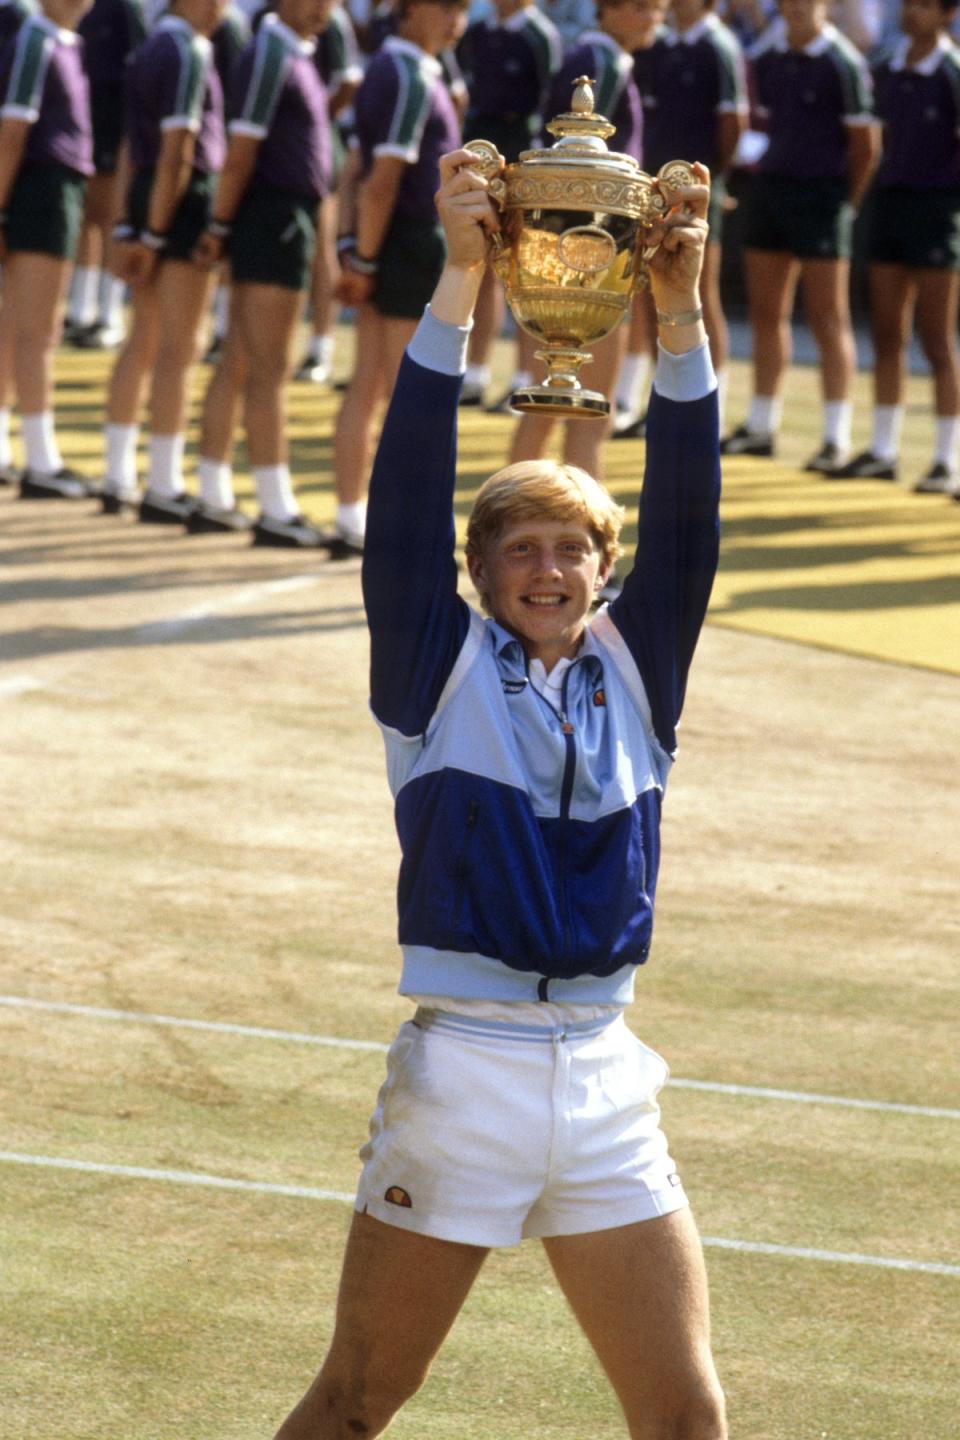 Boris Becker lifted the trophy in 1985 (PA) (PA Wire)